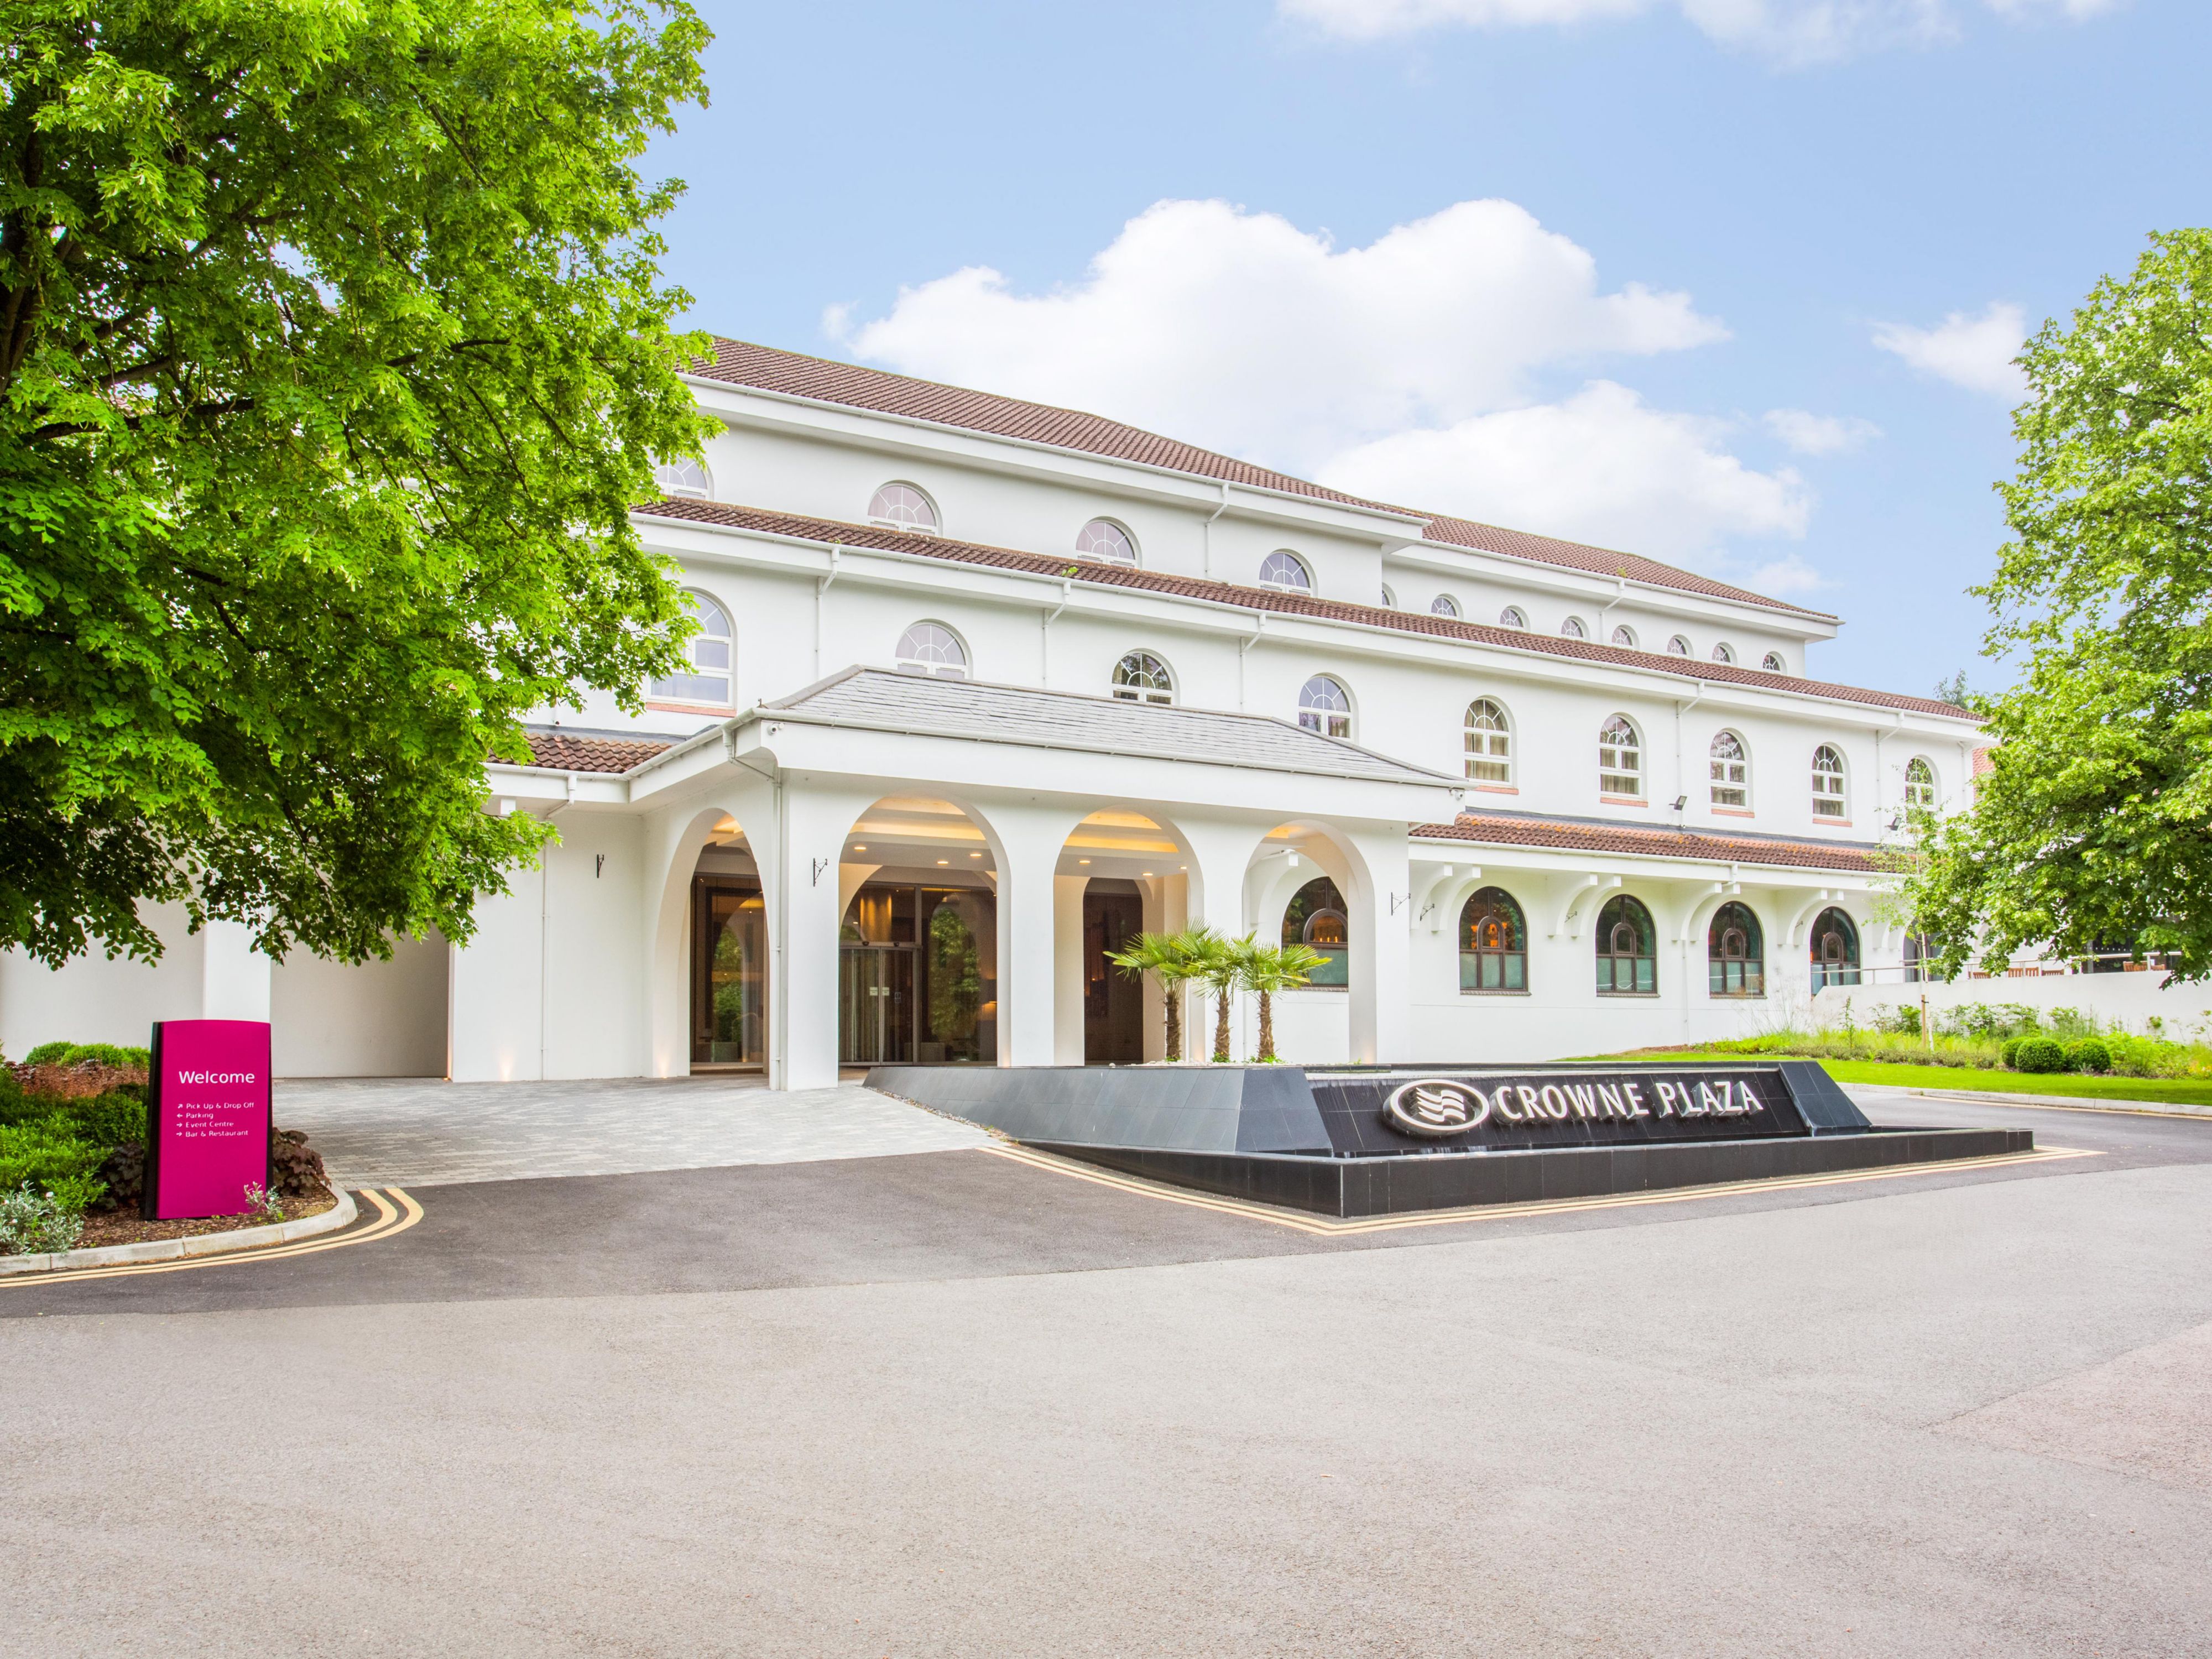 Proud to announce that Hotel Crowne Plaza Gerrards Cross has achieved Silver Green Tourism! 

Accreditation, recognition our commitment to sustainability and responsible tourism. This accolade is a testament to our dedication and a step towards a greener future.